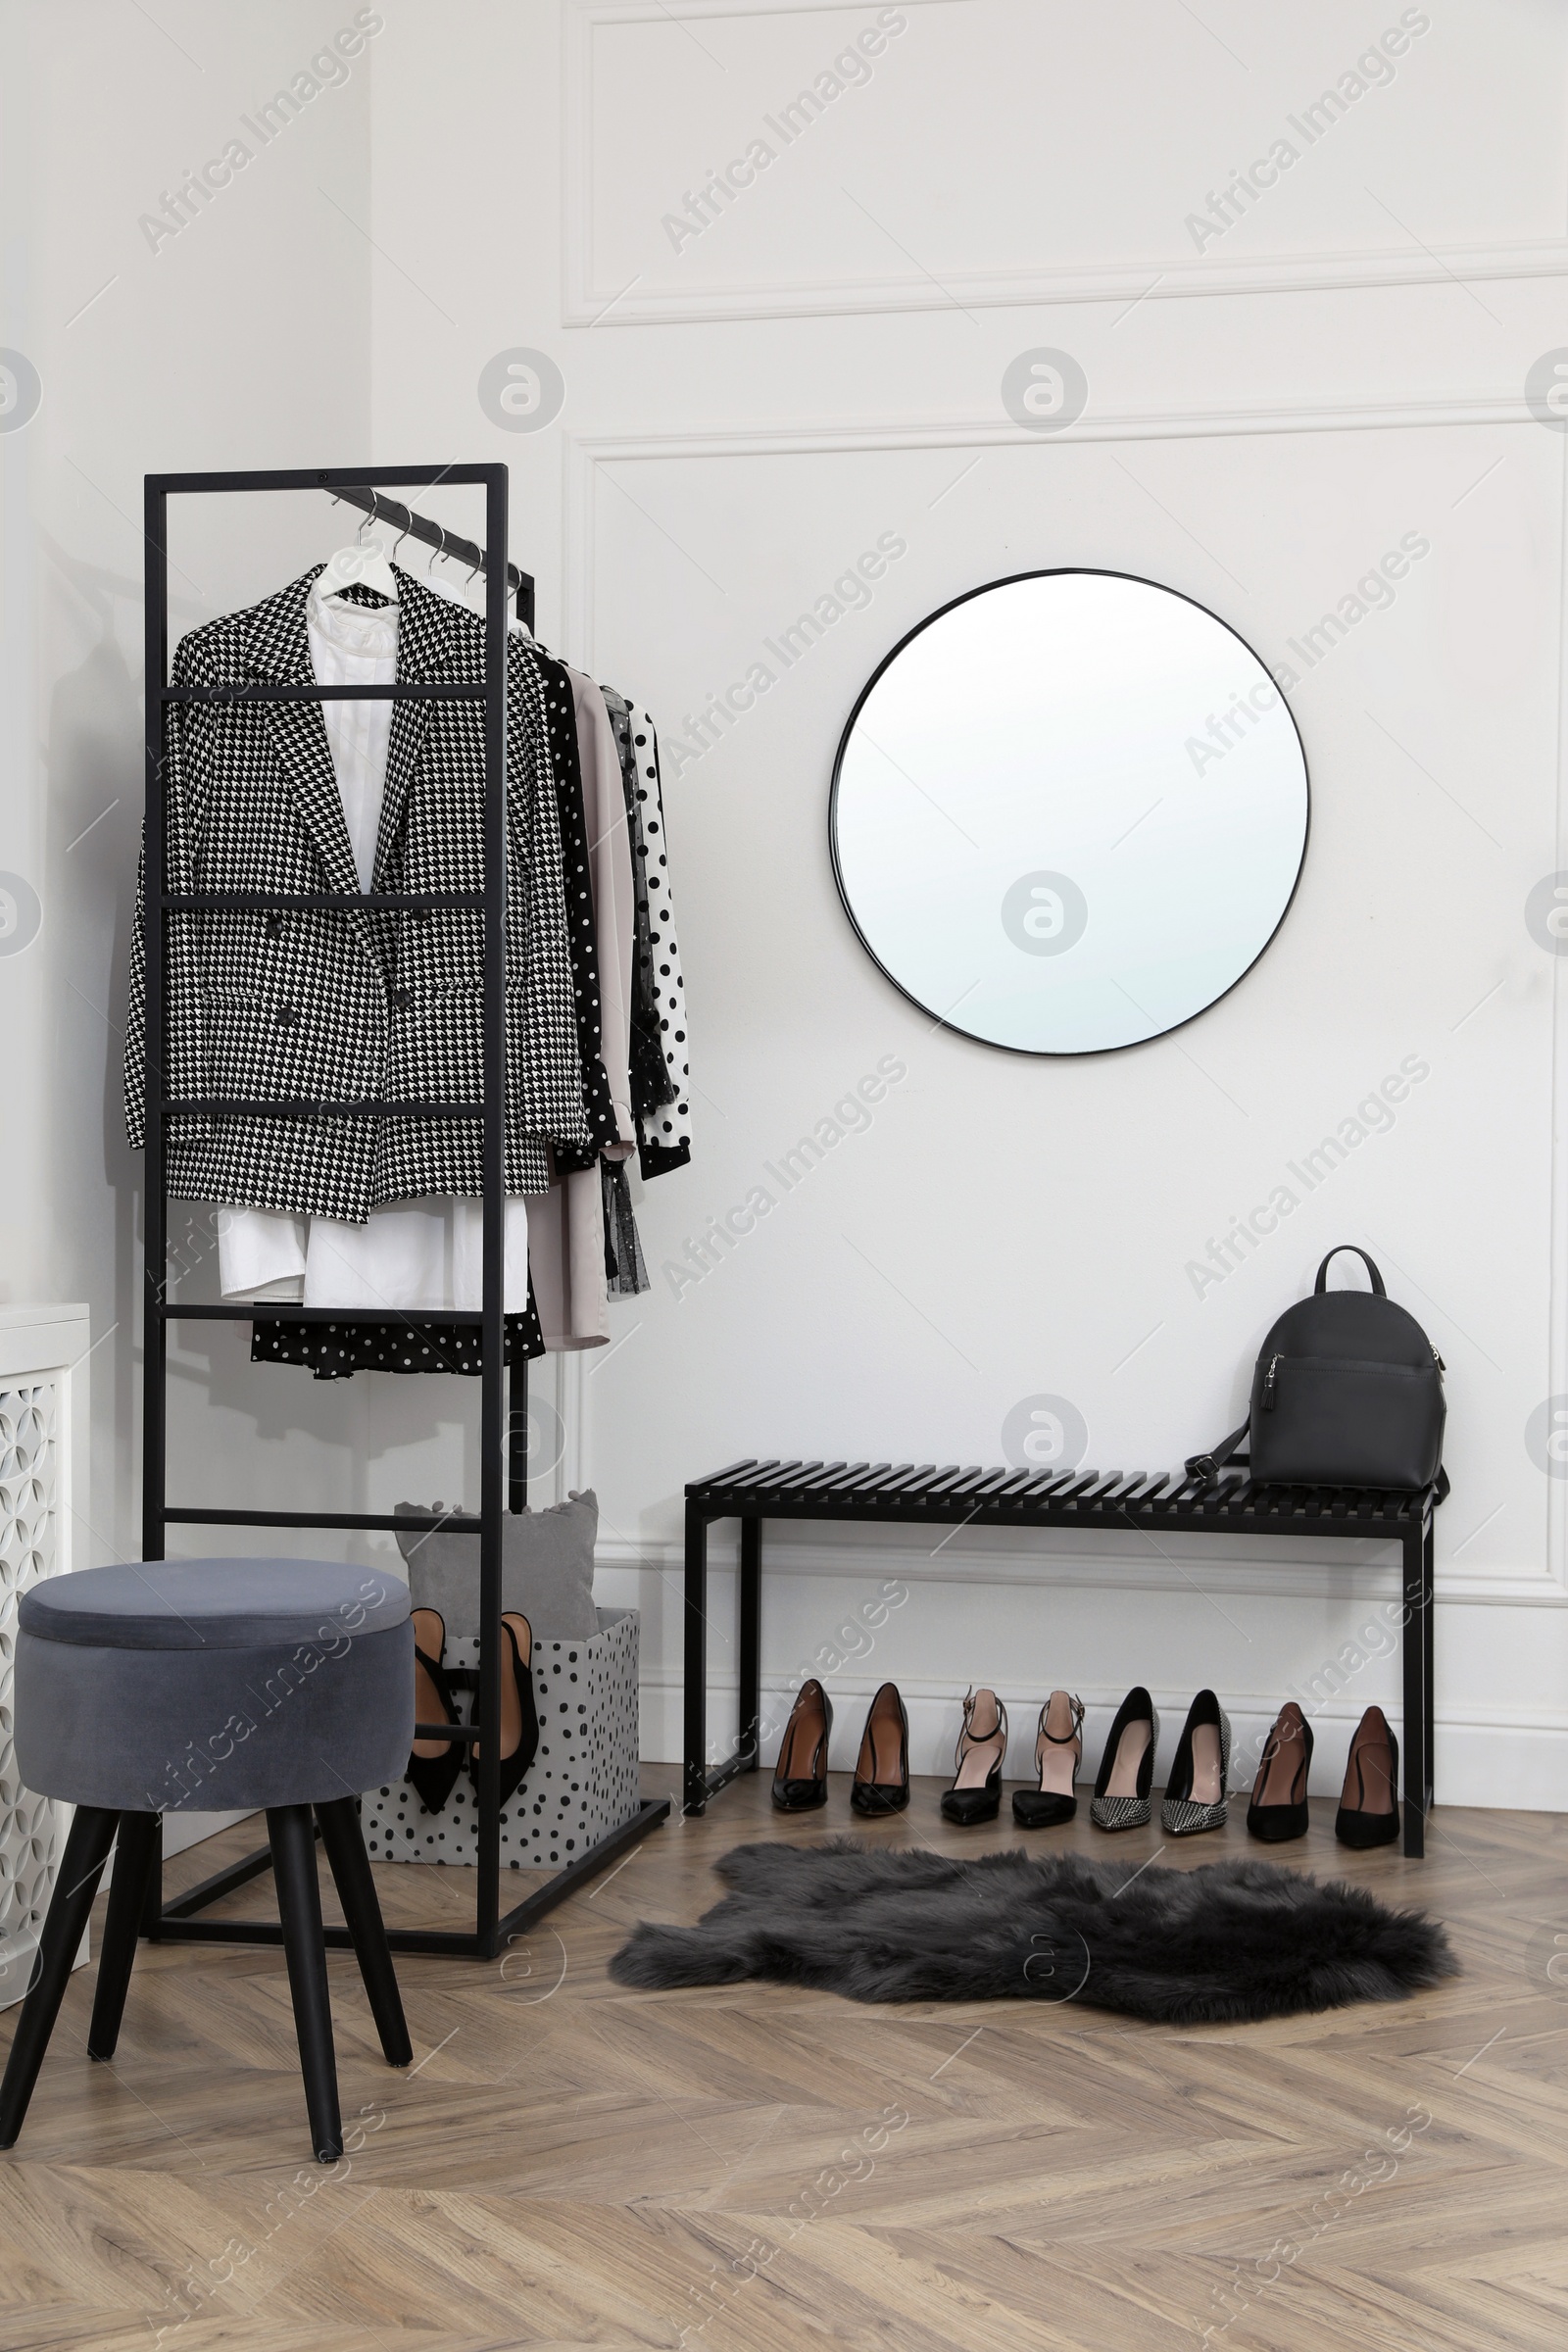 Photo of Dressing room with stylish clothes, shoes and accessories. Elegant interior design